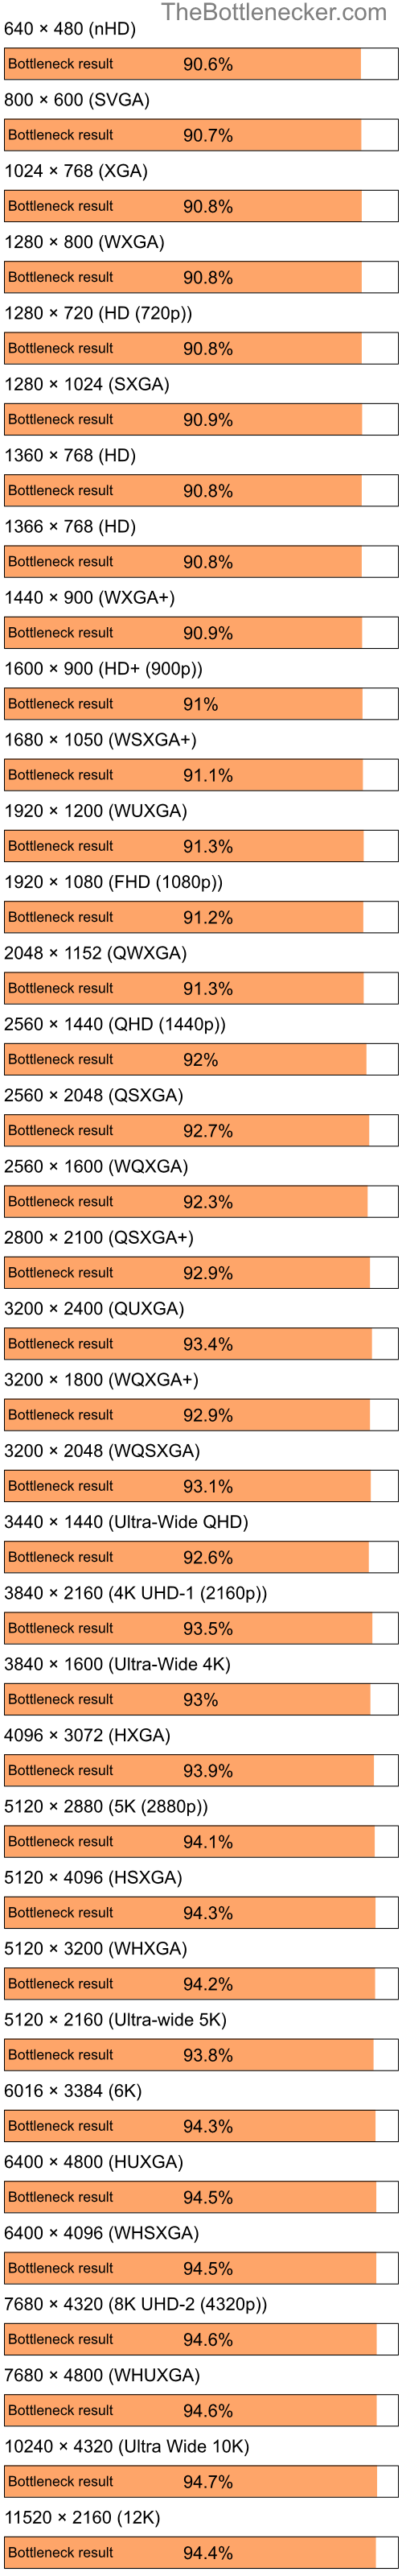 Bottleneck results by resolution for Intel Pentium 4 and NVIDIA GeForce4 MX 440 in Graphic Card Intense Tasks